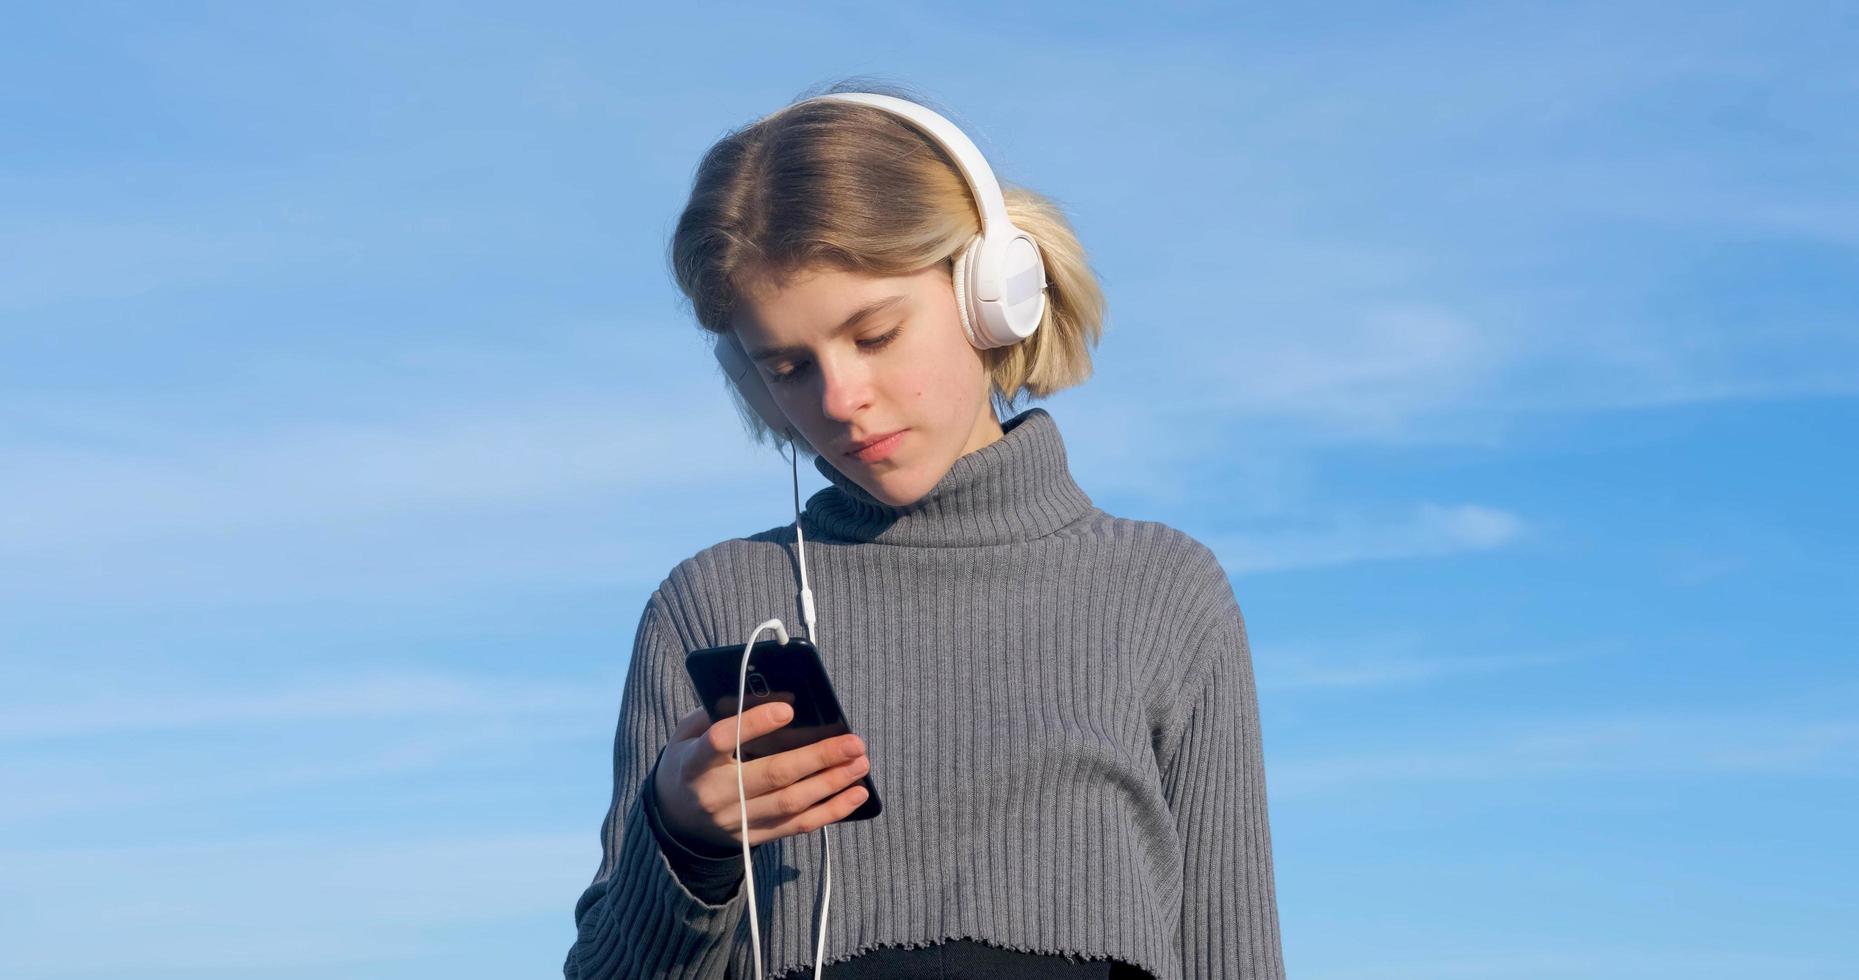 Young handsome female listen to music with headphones outdoor on the beach against sunny blue sky photo